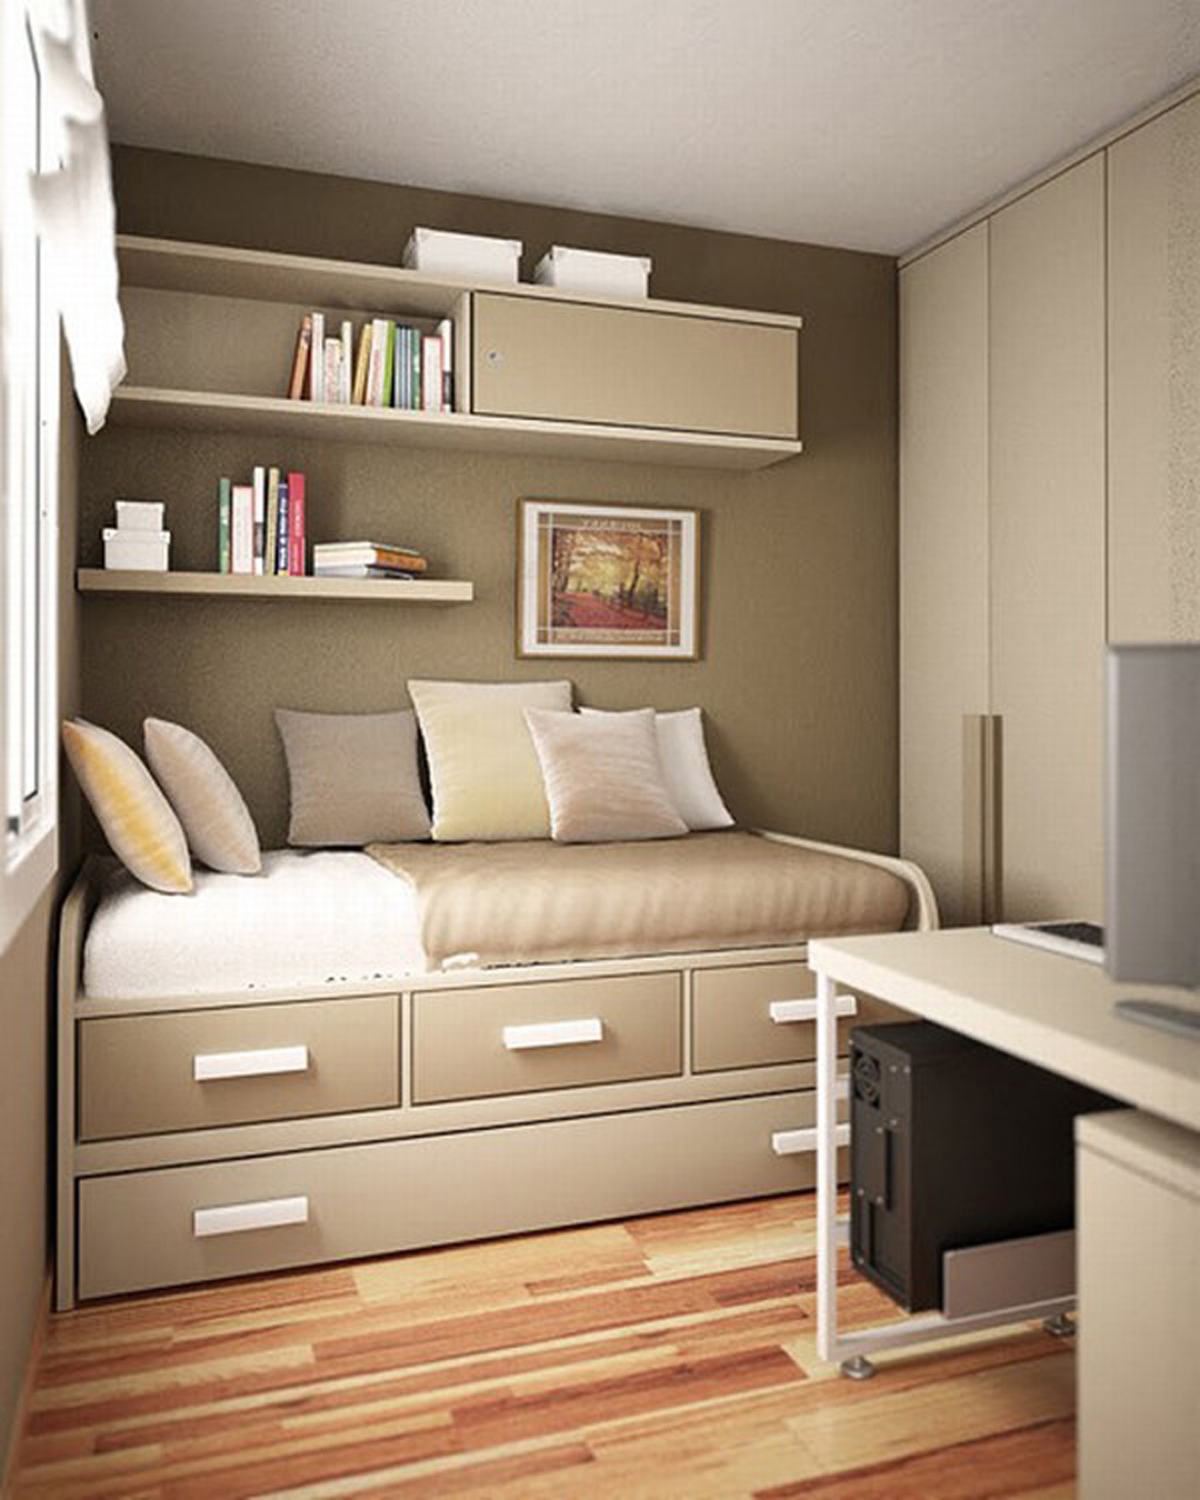 ikea bedroom furniture for small spaces photo - 4